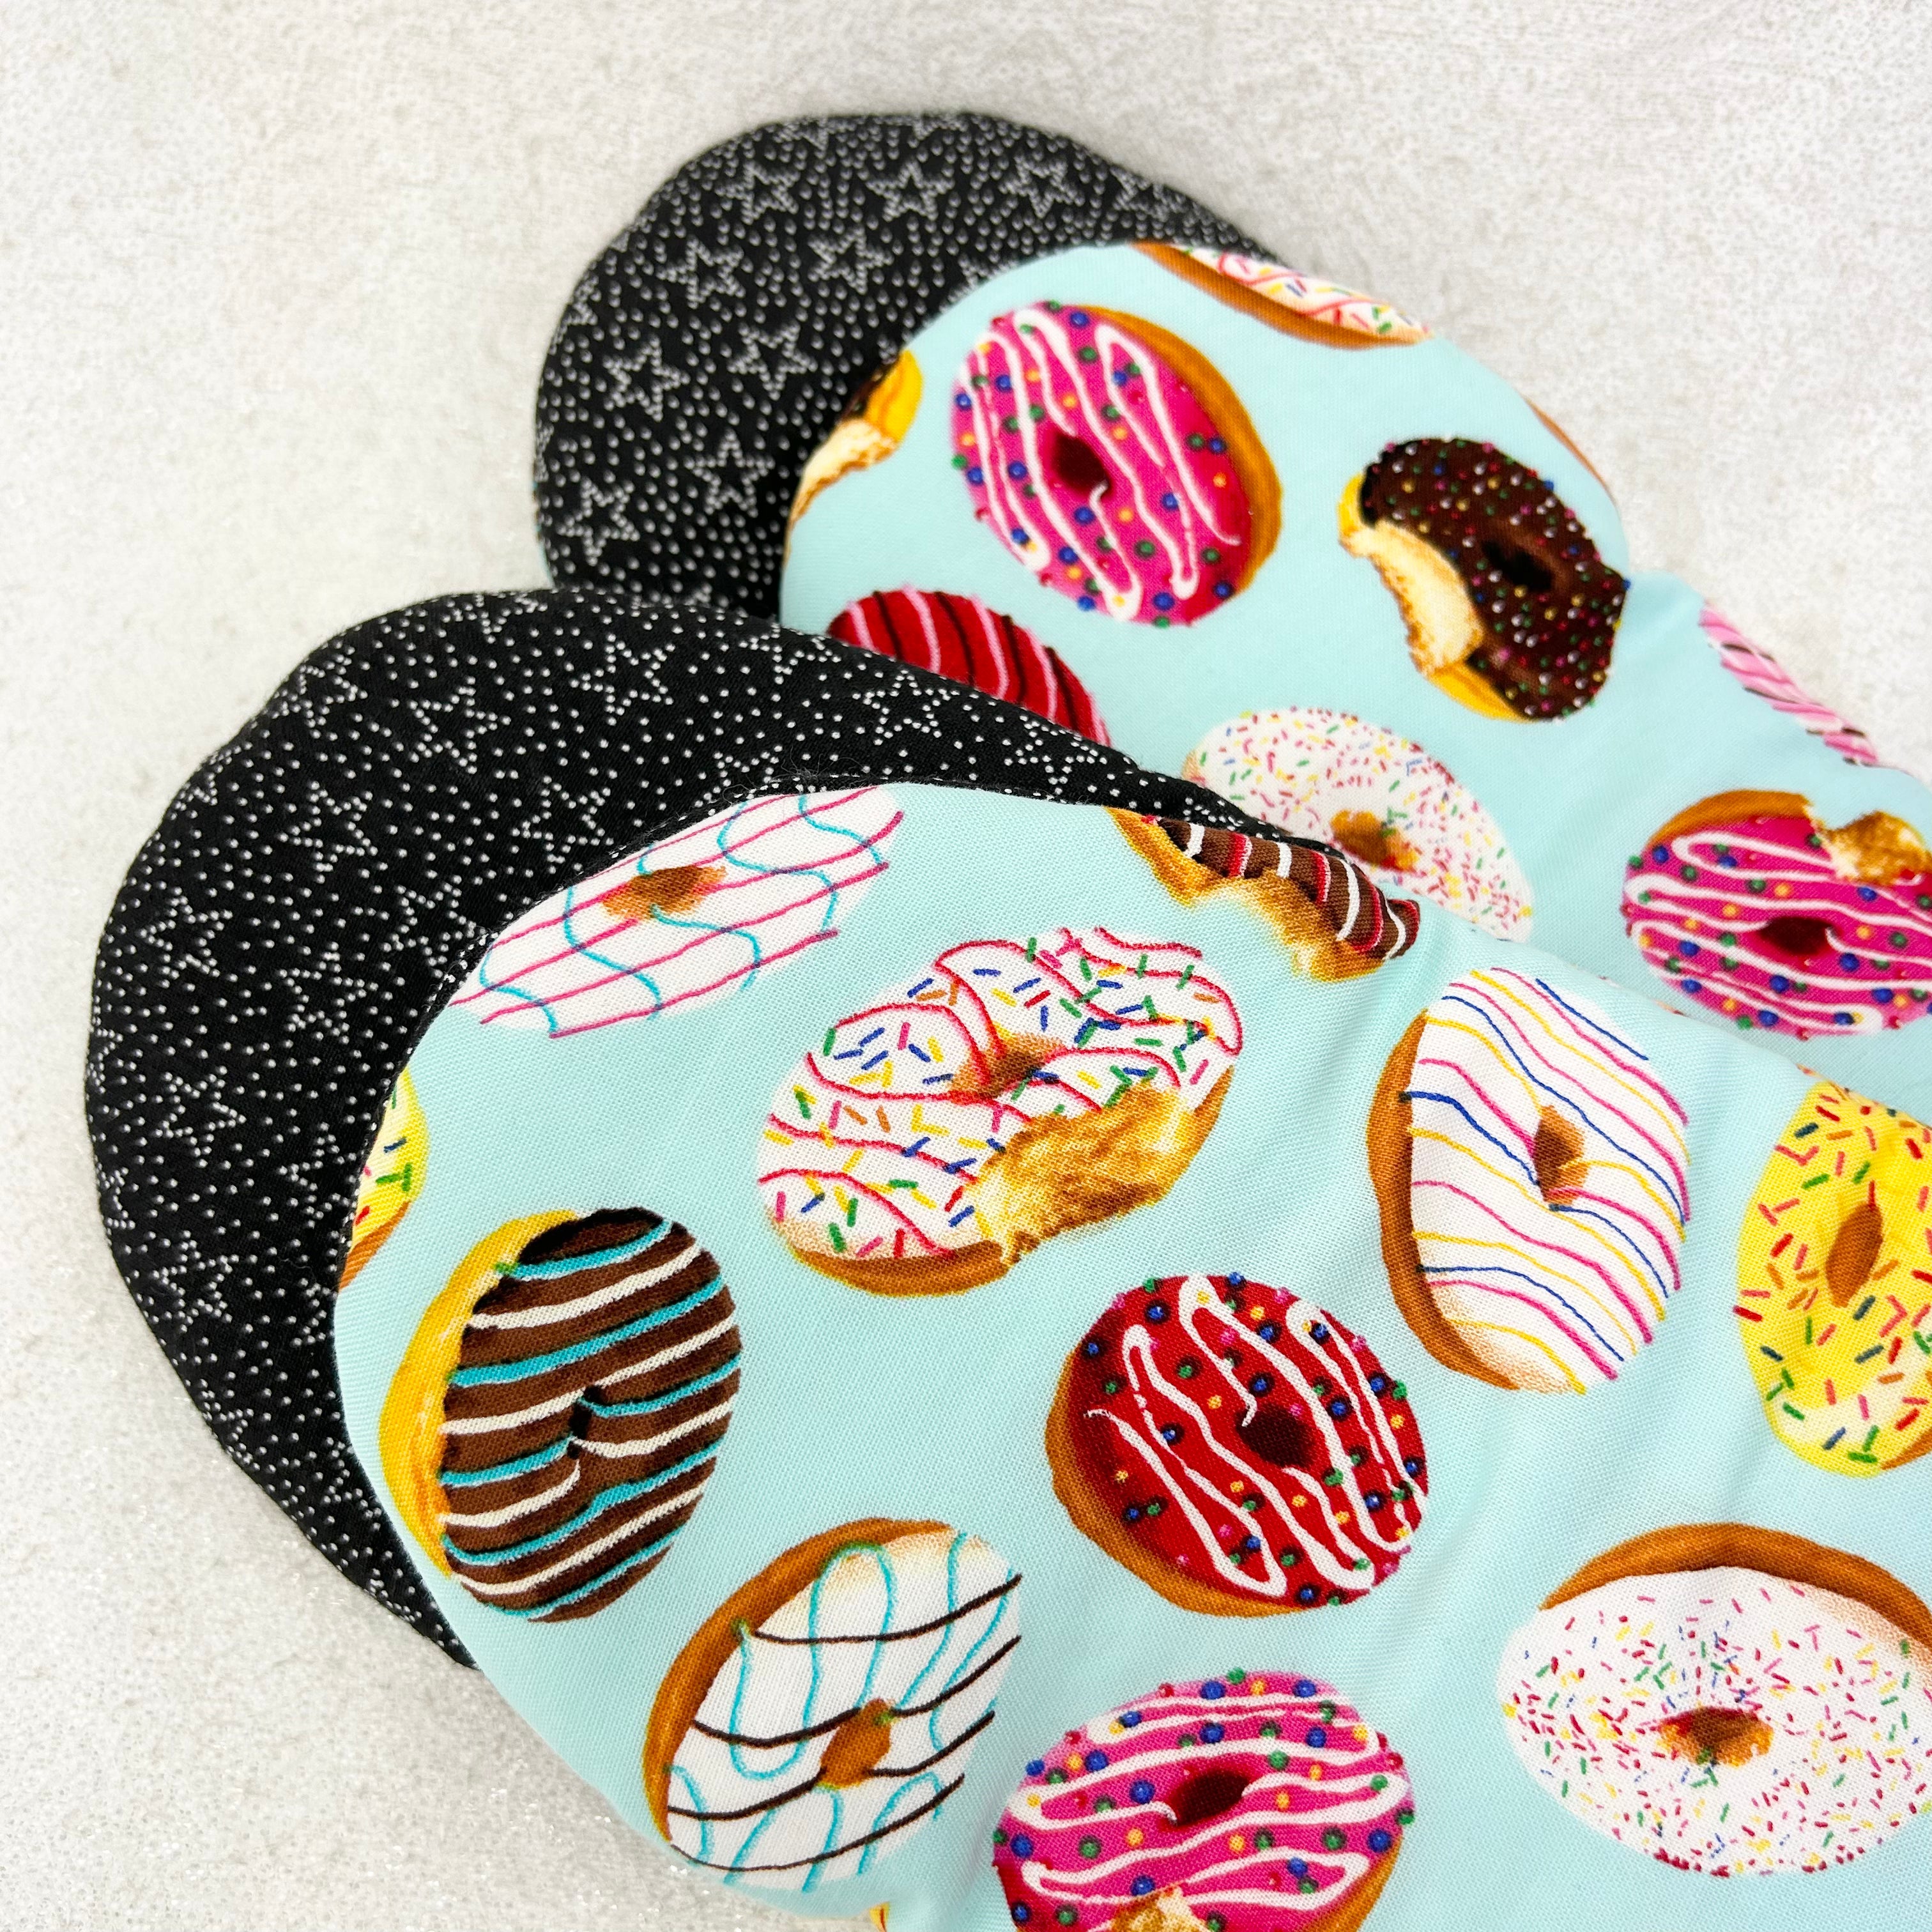 Oven Mitts: Donuts